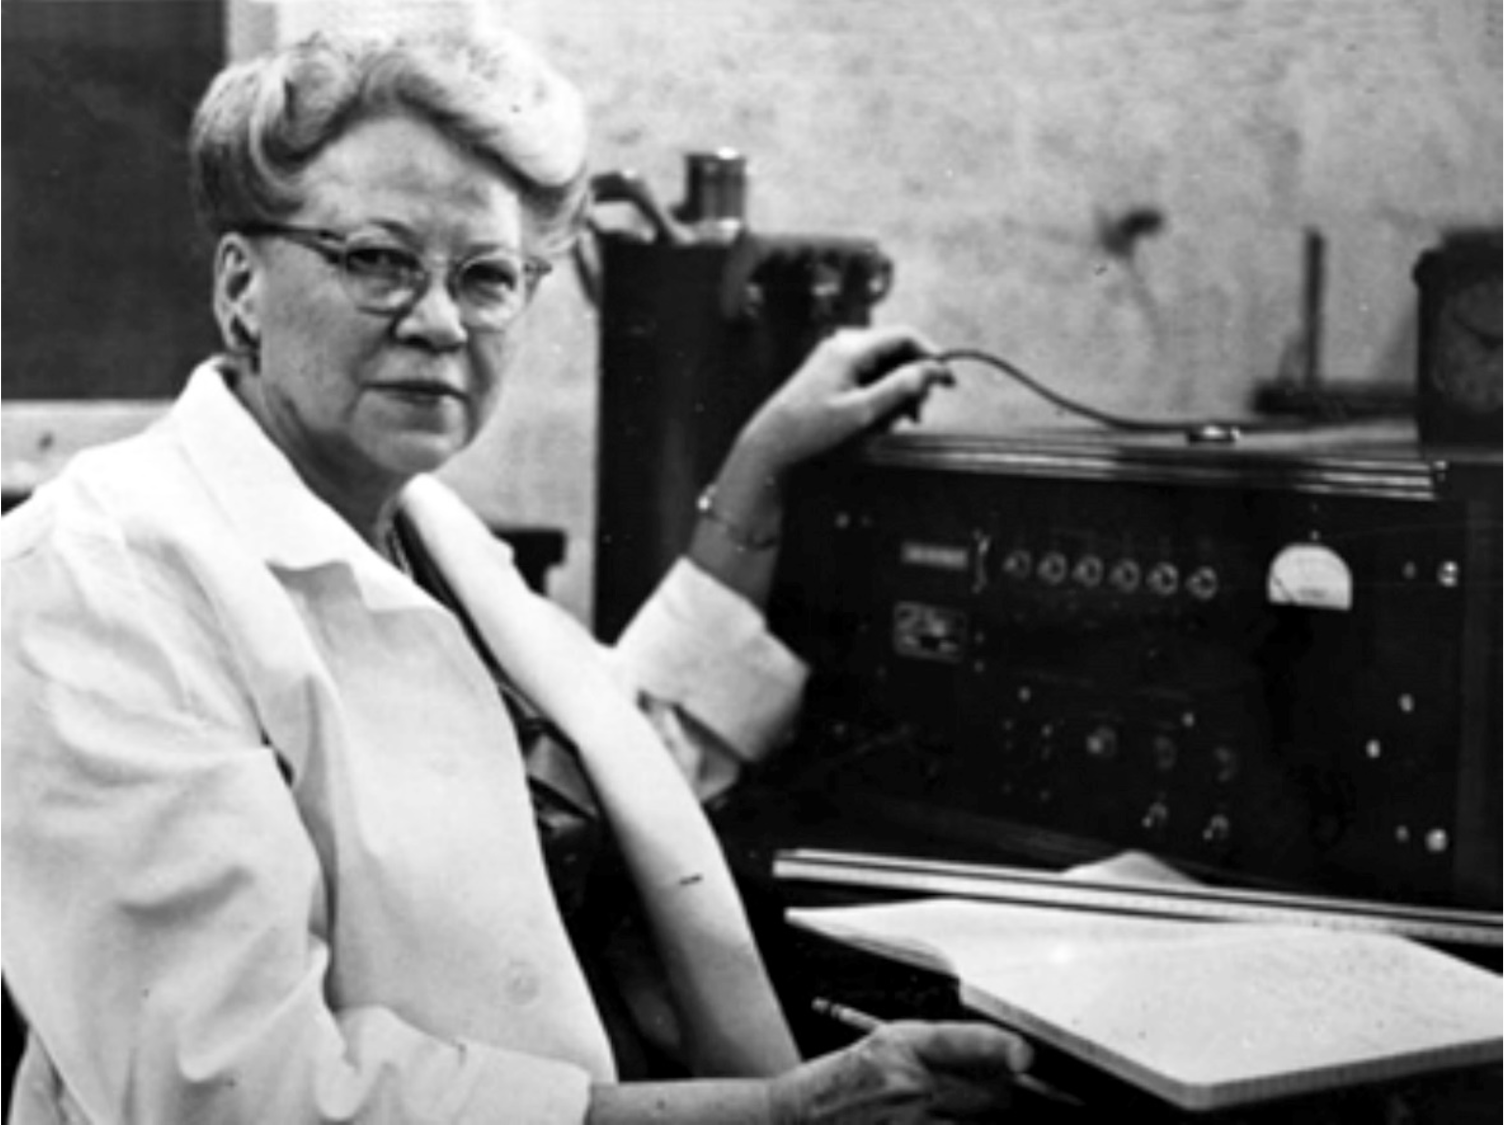 Black and white photo of Dr. Edith Quimby with equipment in lab